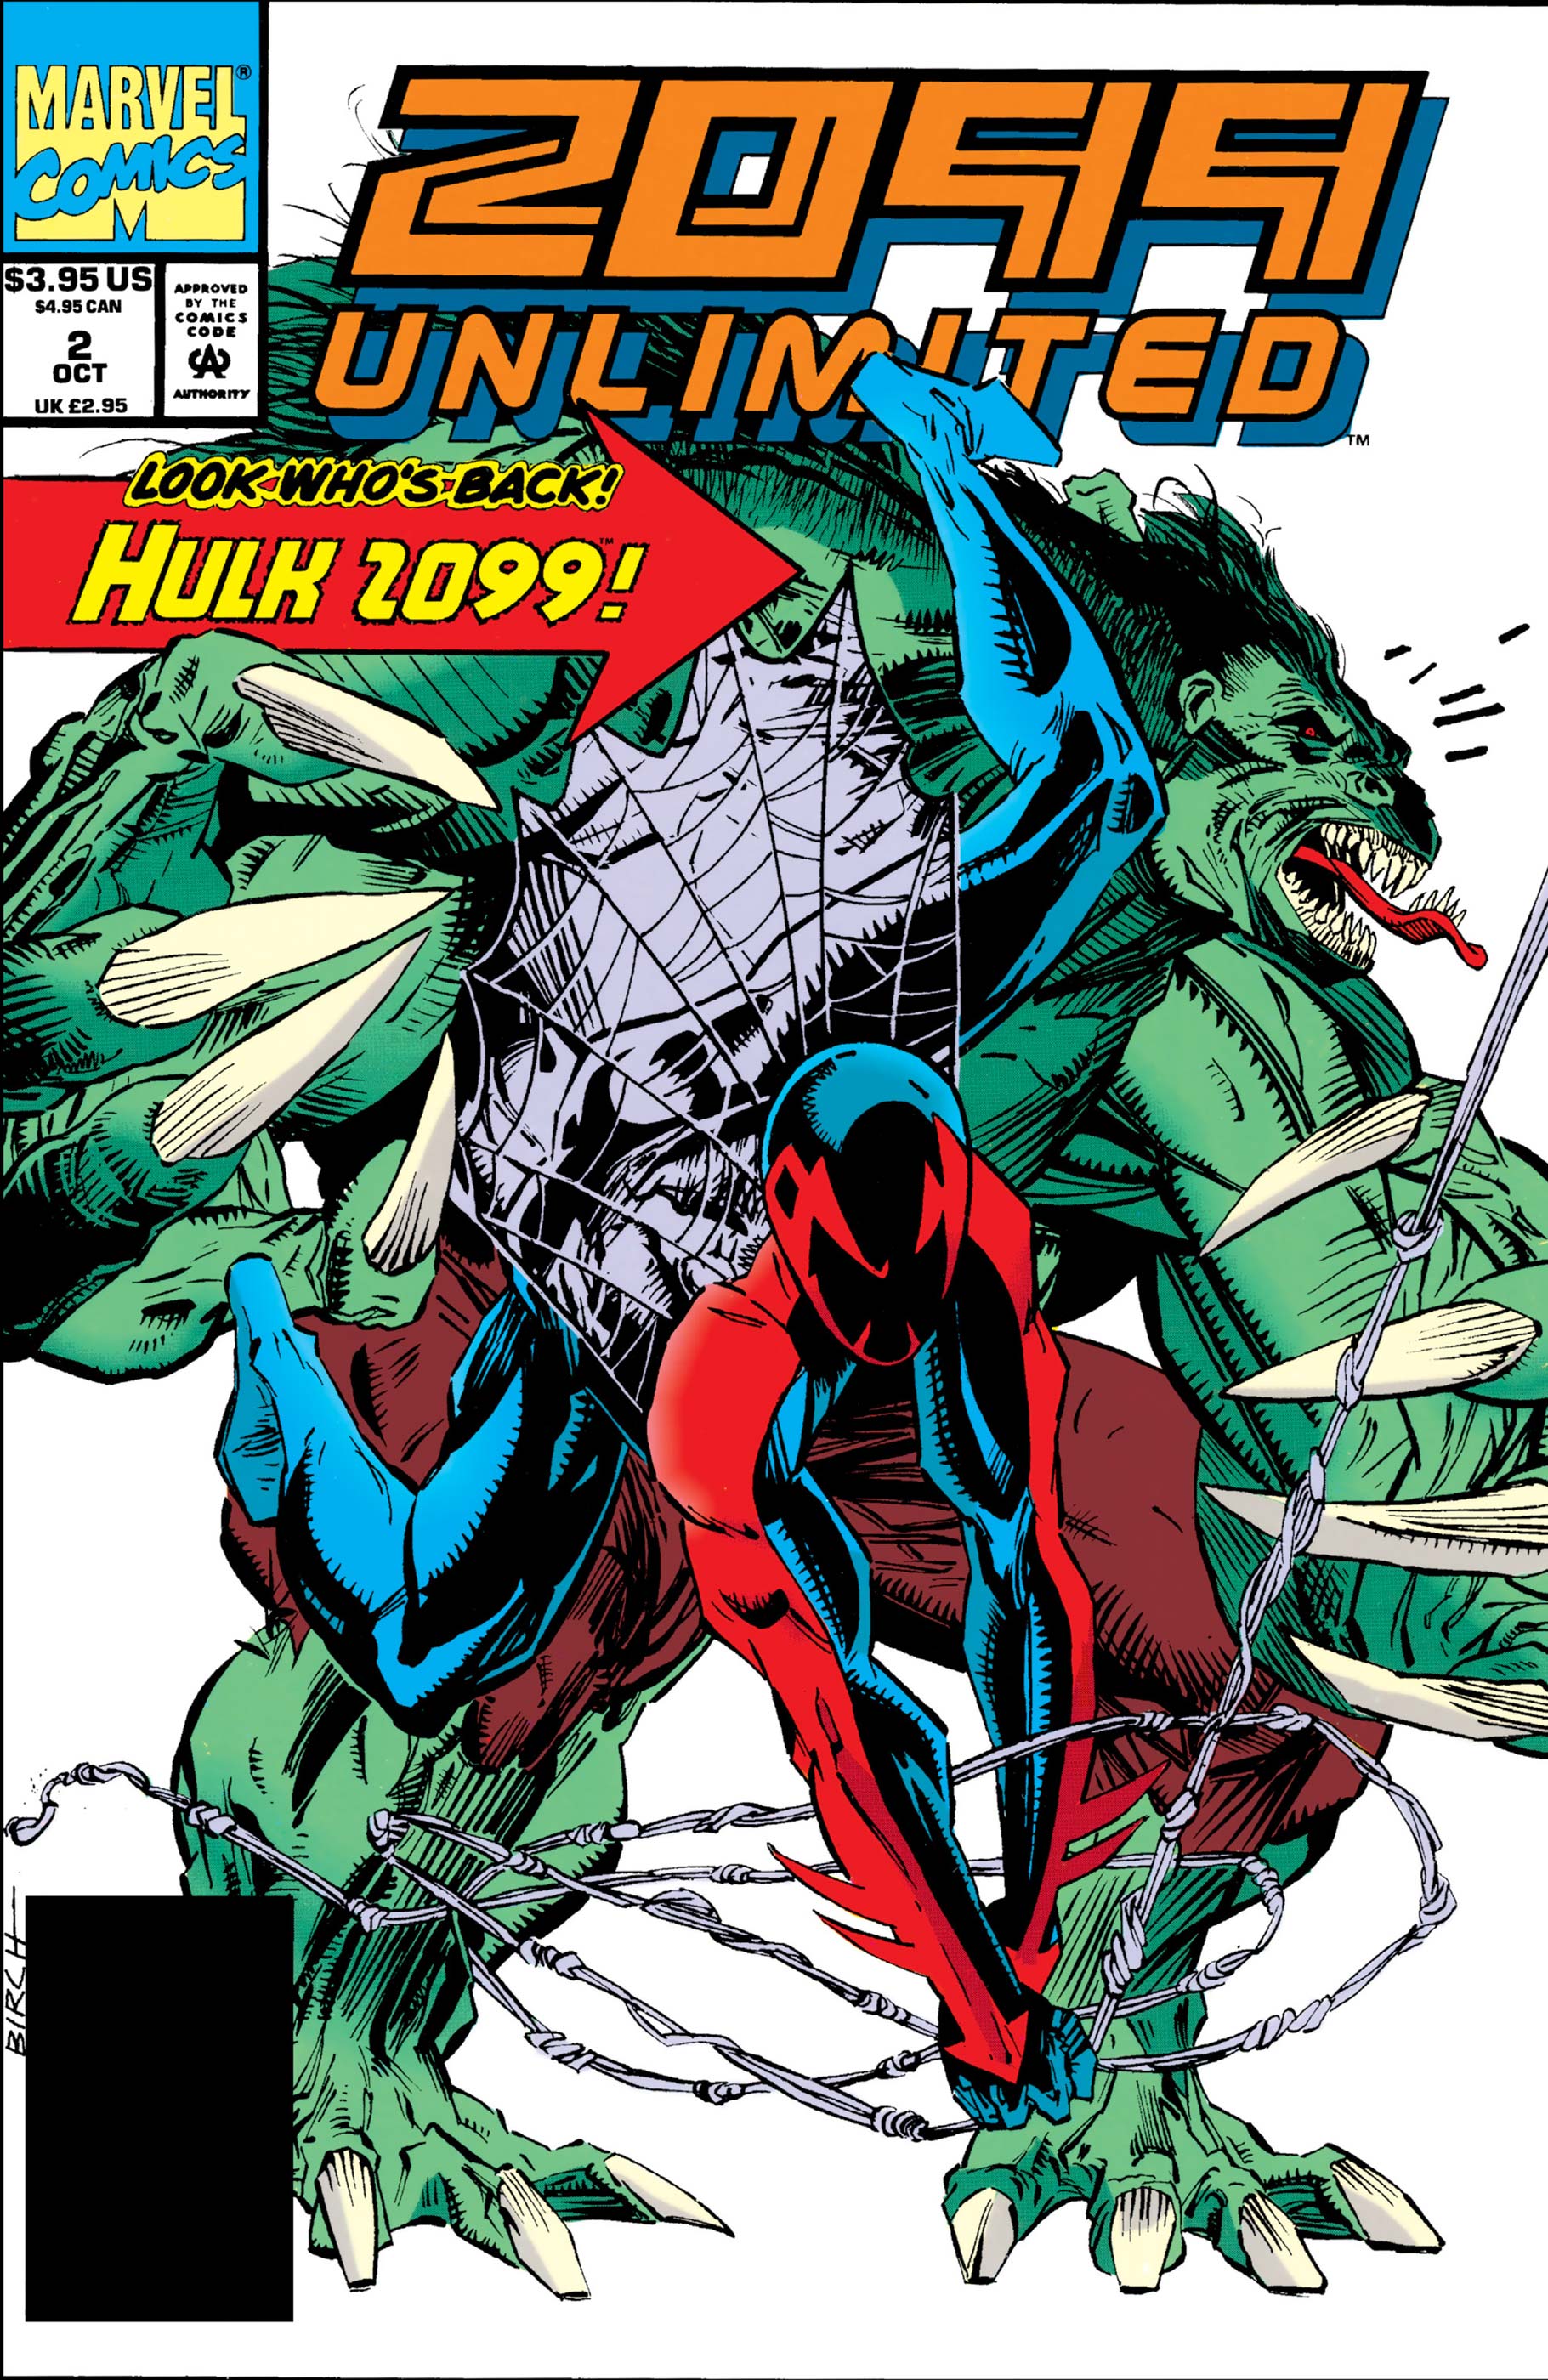 2099 Unlimited (1993) #2